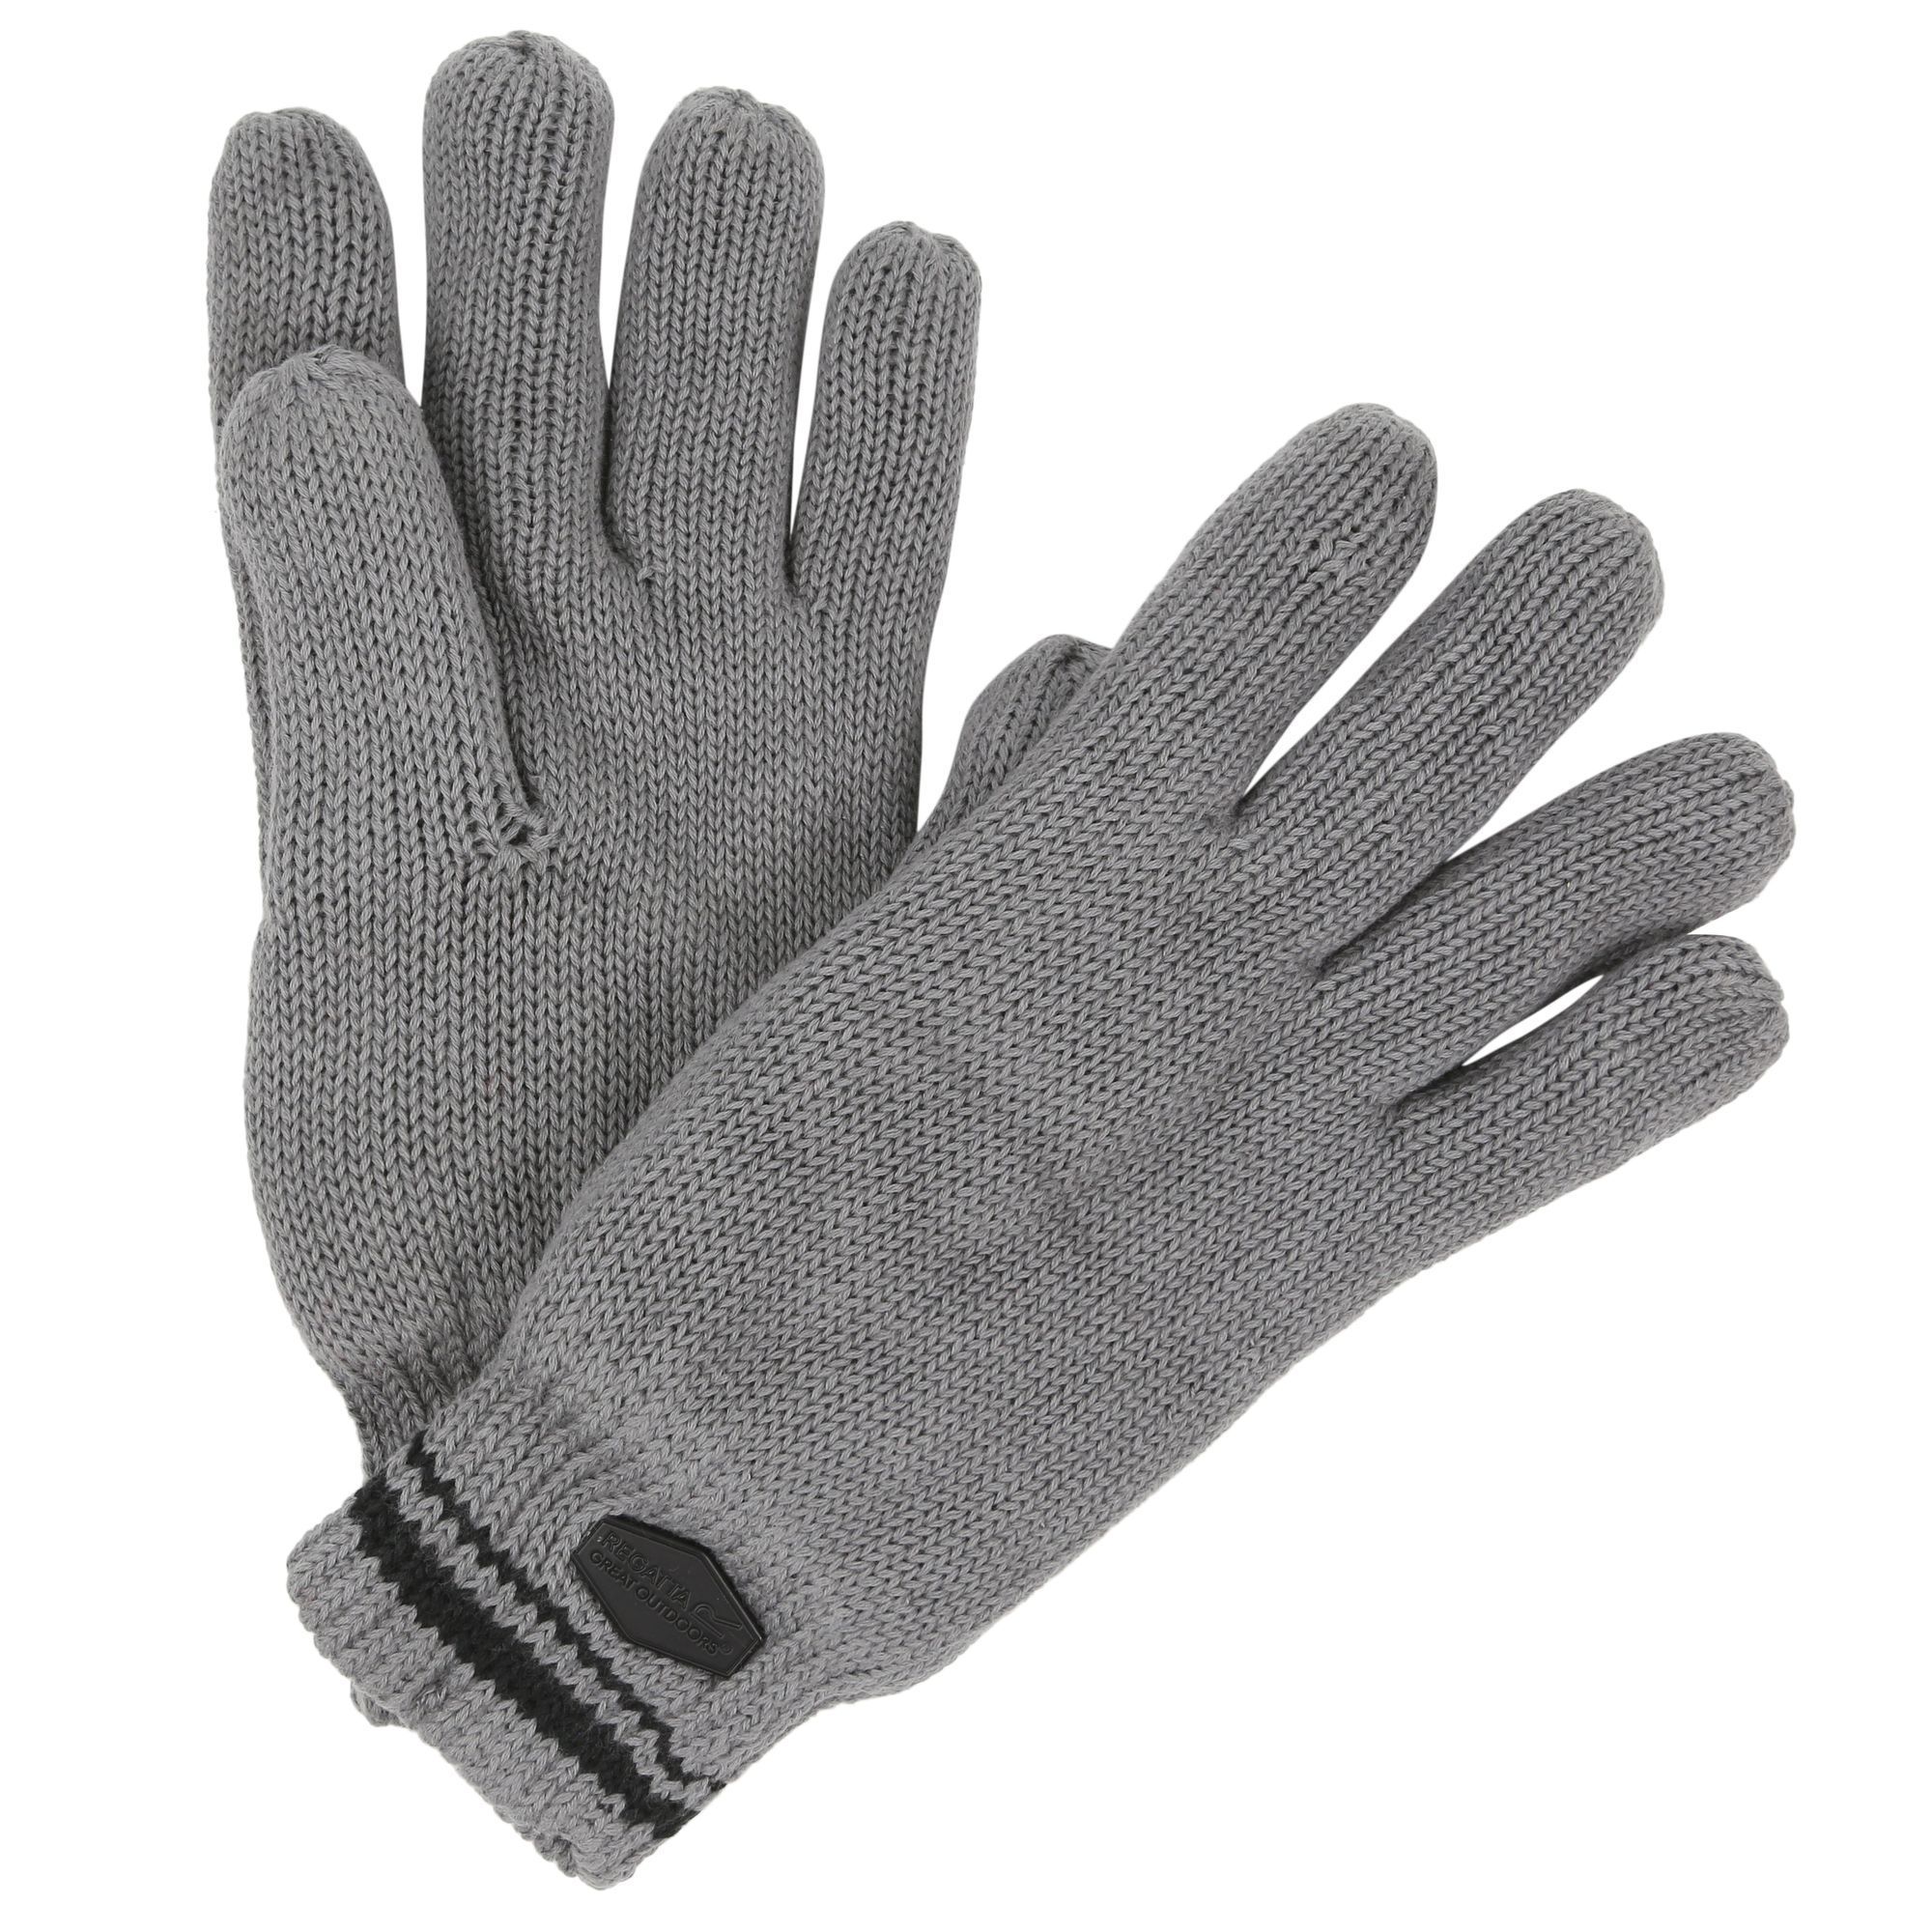 Insulating 100% cotton jersey knit gloves with a comfortable fleece lining.